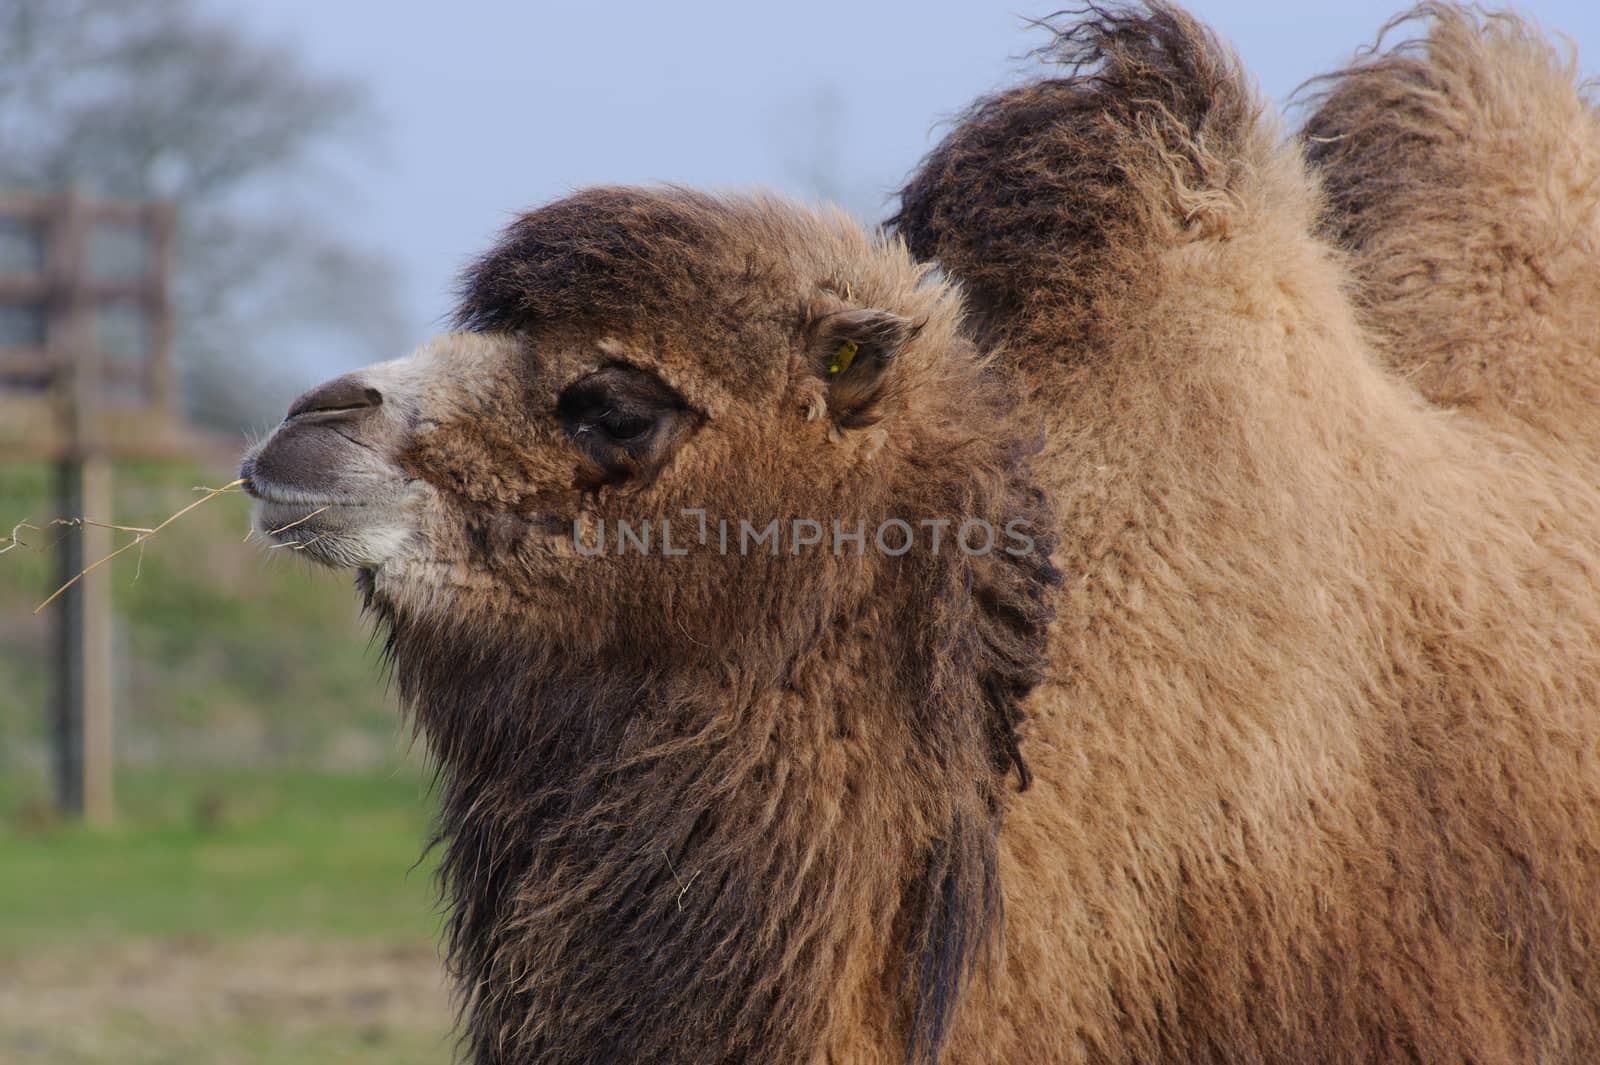 camel chewing grass in the sun